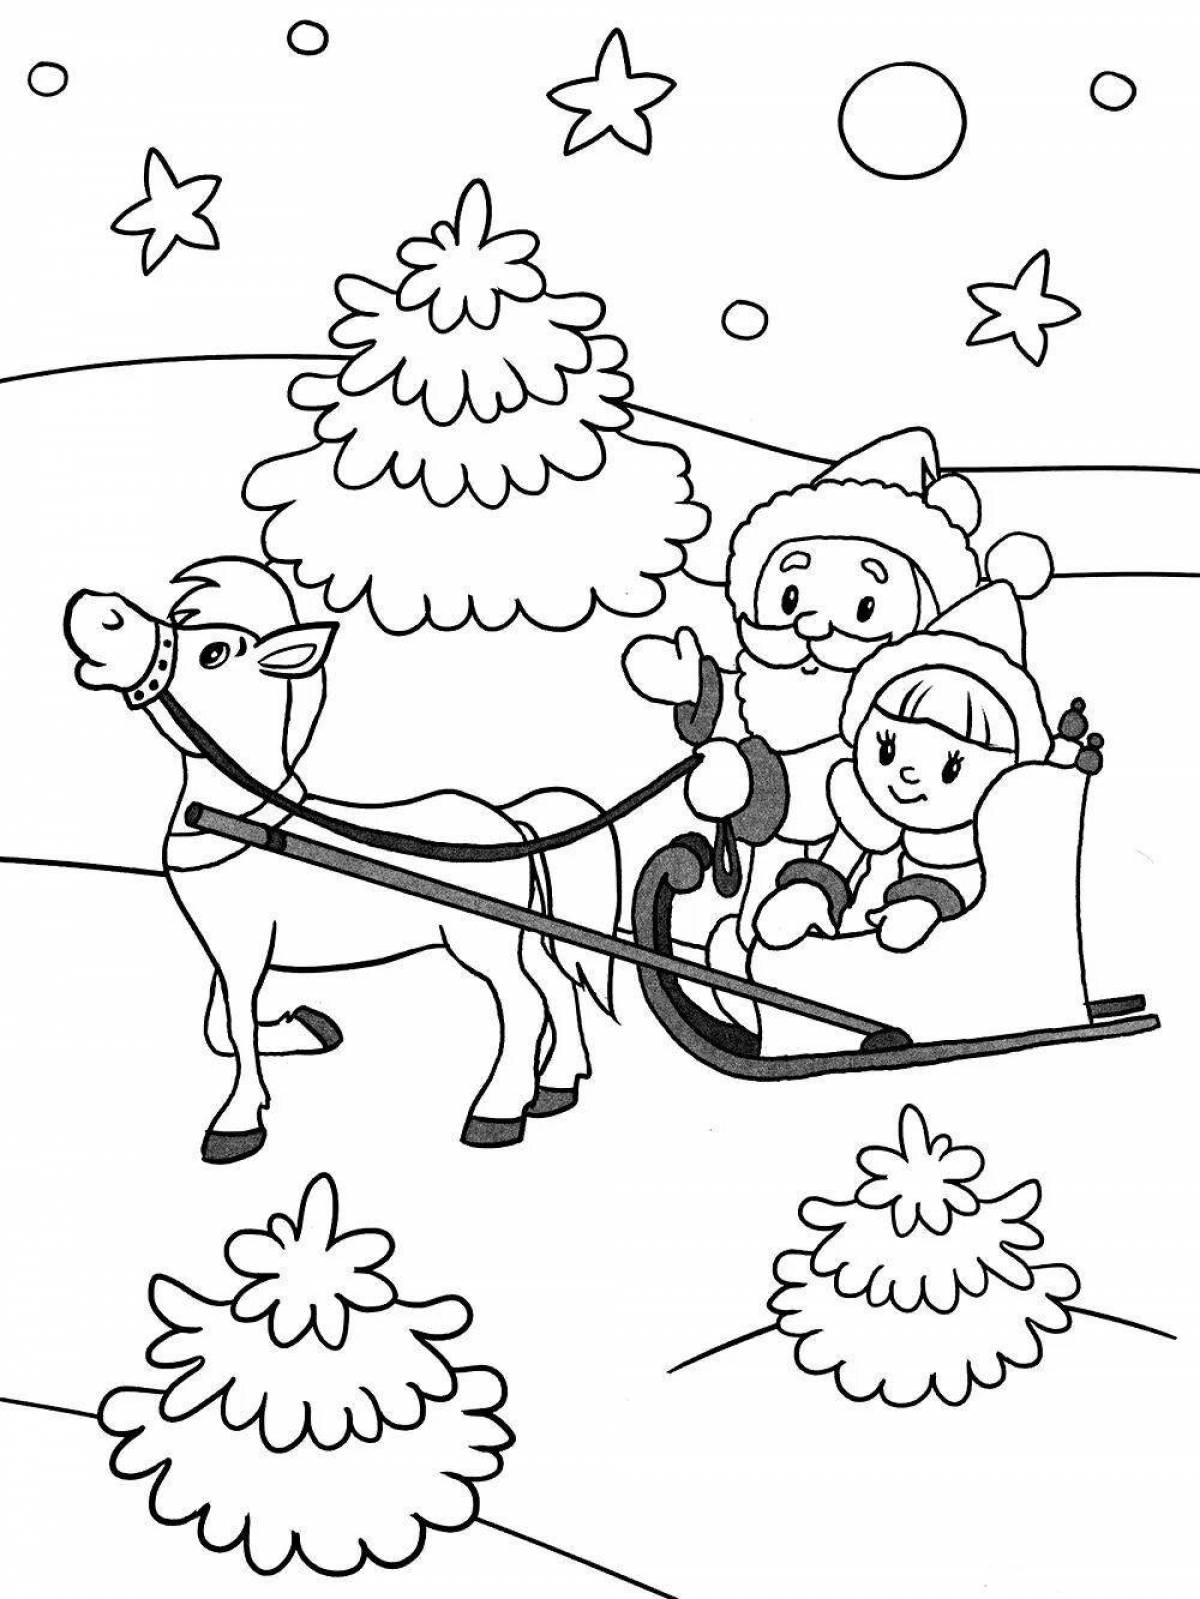 Glazey winter coloring page for pre-k